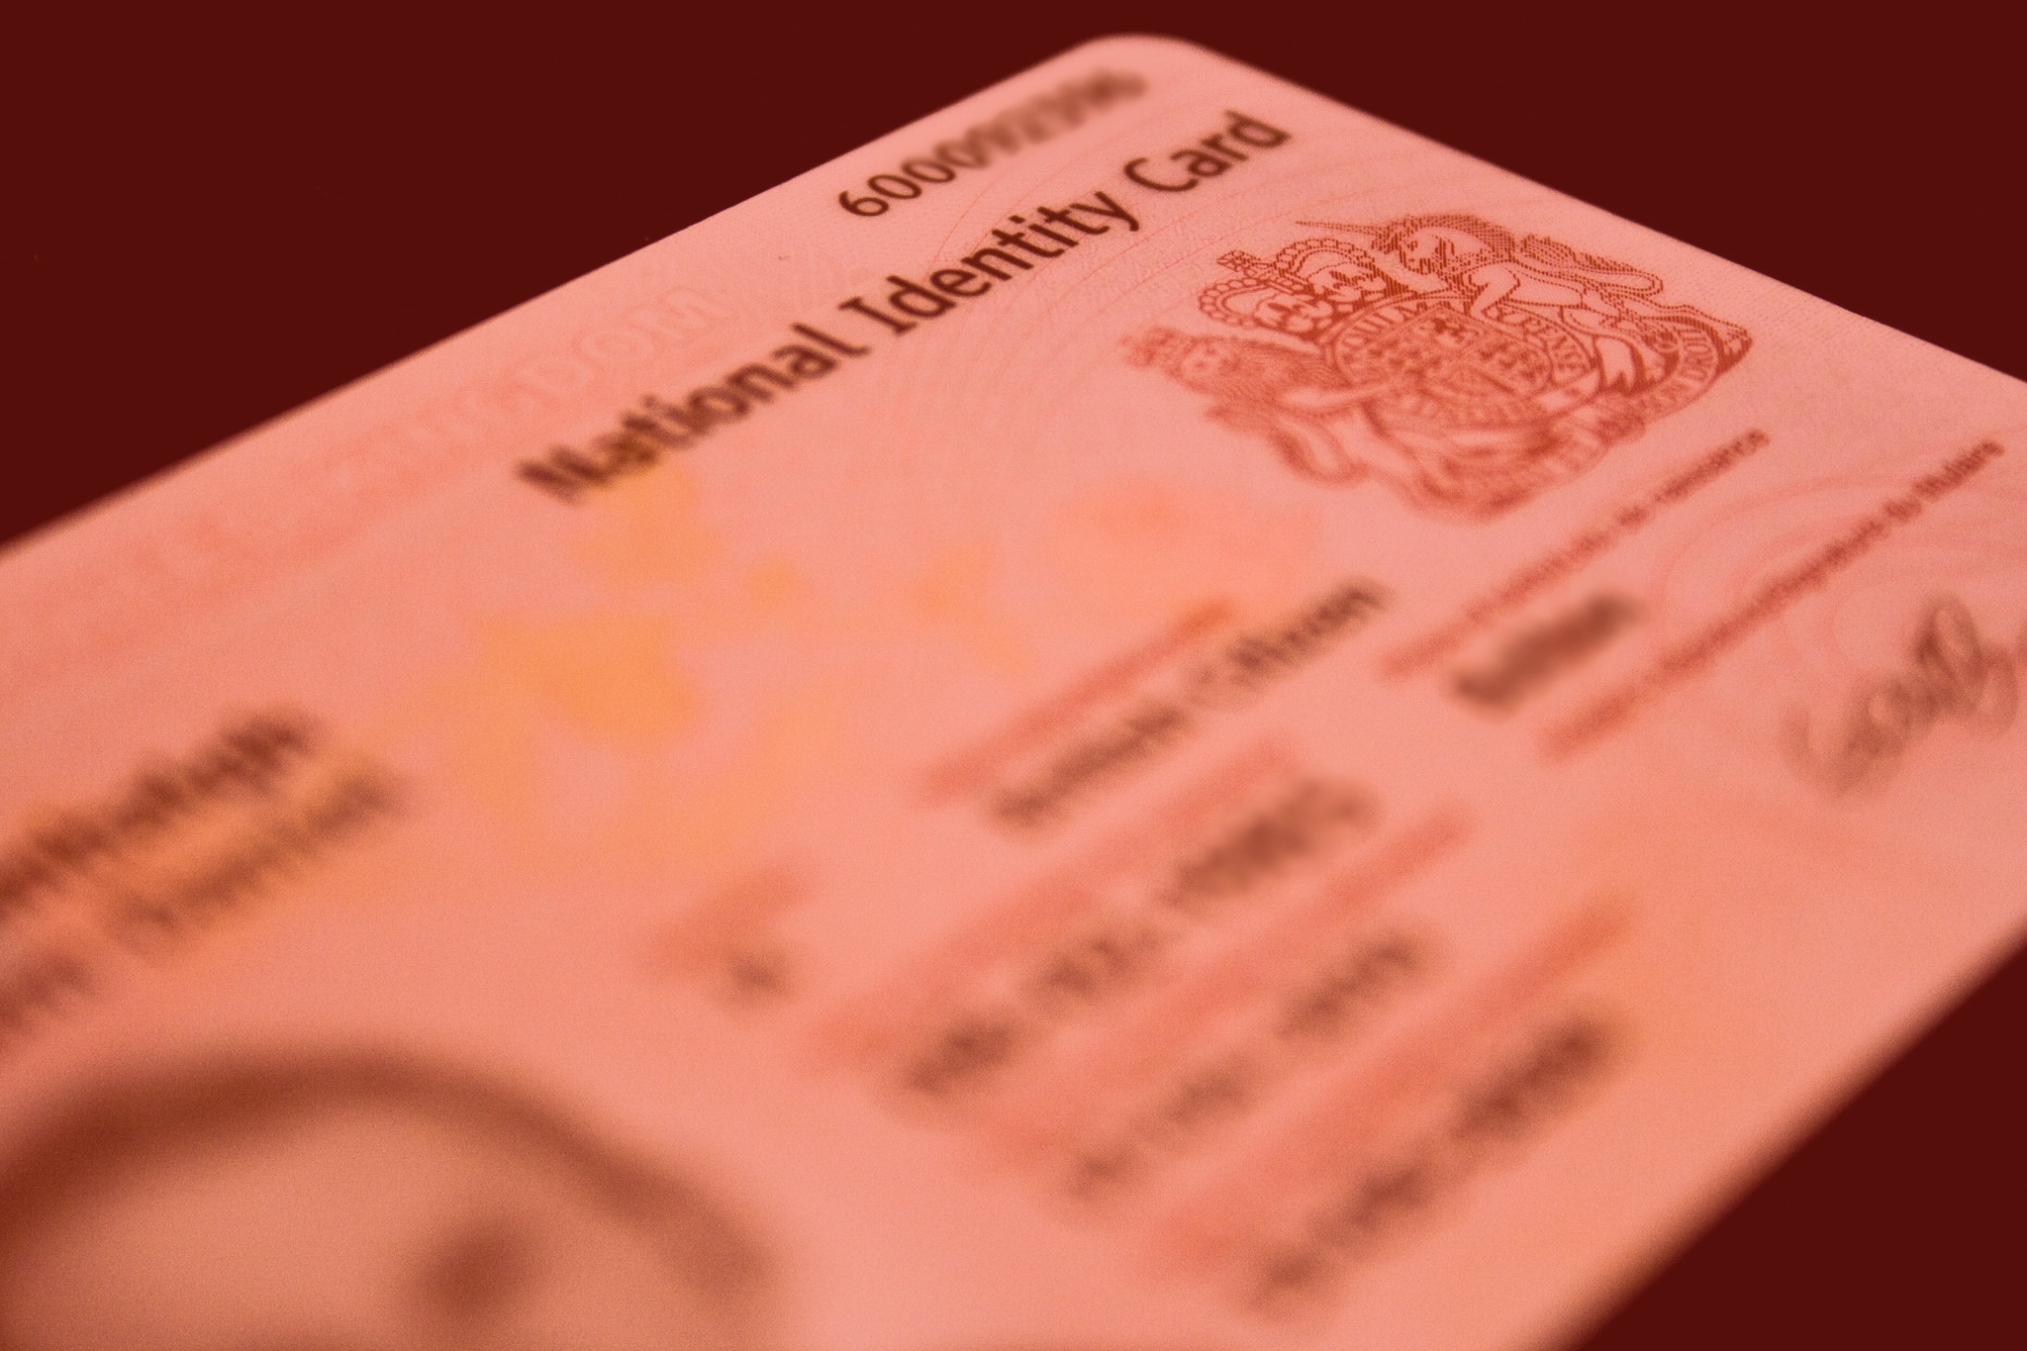 Photo: "National Identity Card", by Sam Greenhalgh licensed under CC BY 2.0. Hue modified from the original